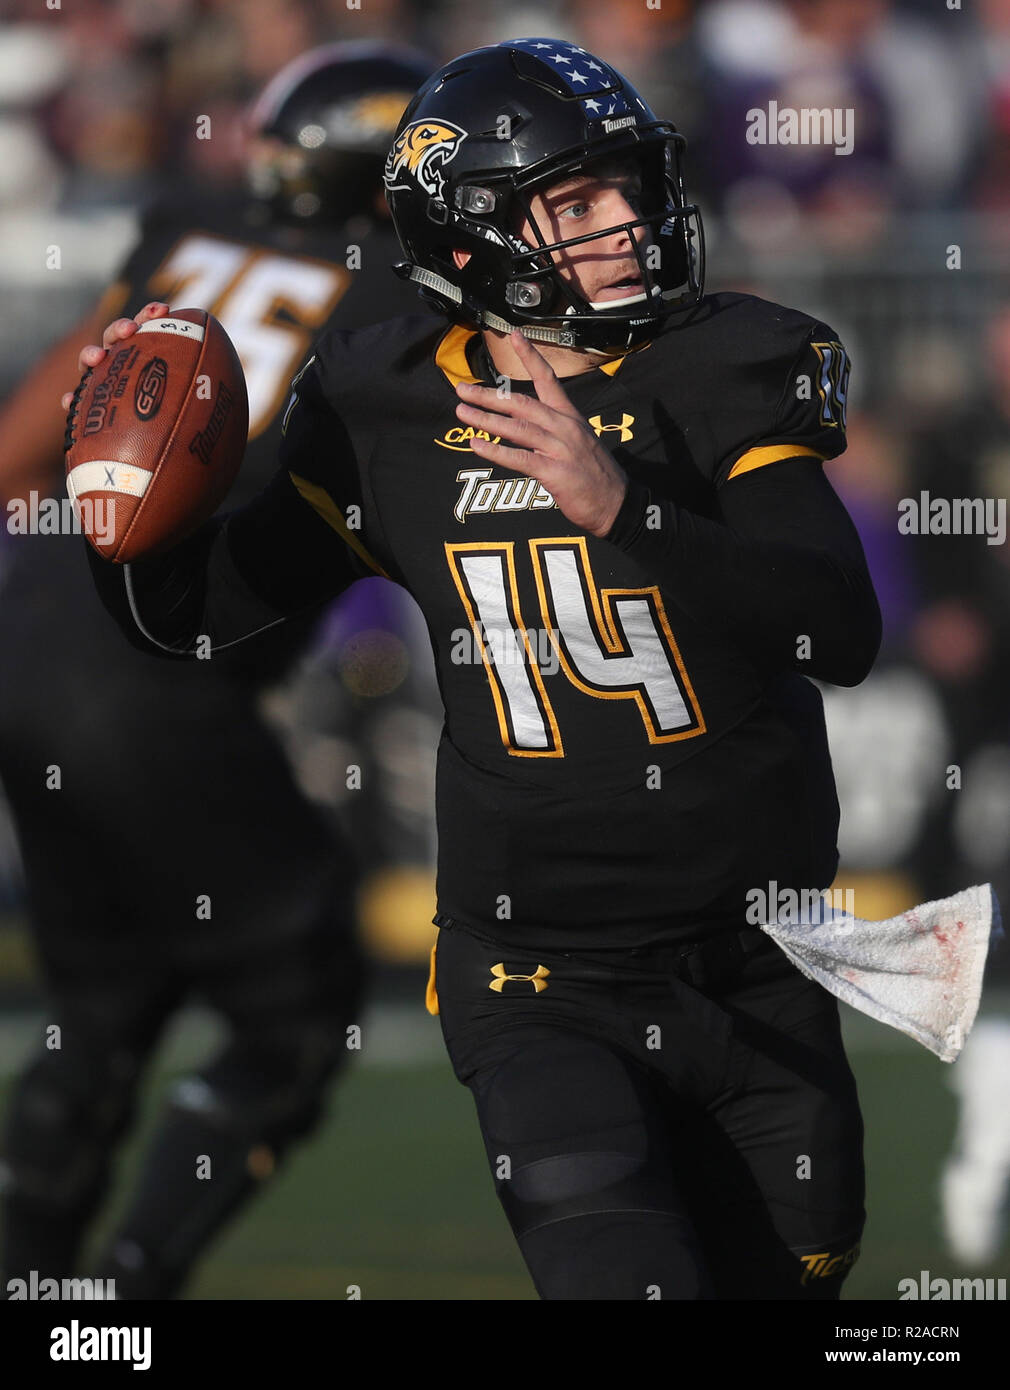 Towson QB Tom Flacco (14) looks to pass against James Madison in Colonial Athletic Association football action at Unitas Stadium in Towson, MD on November 17, 2018. The James Madison Dukes defeated the Towson Tigers 38-17. Photo/ Mike Buscher/ Cal Sport Media Stock Photo